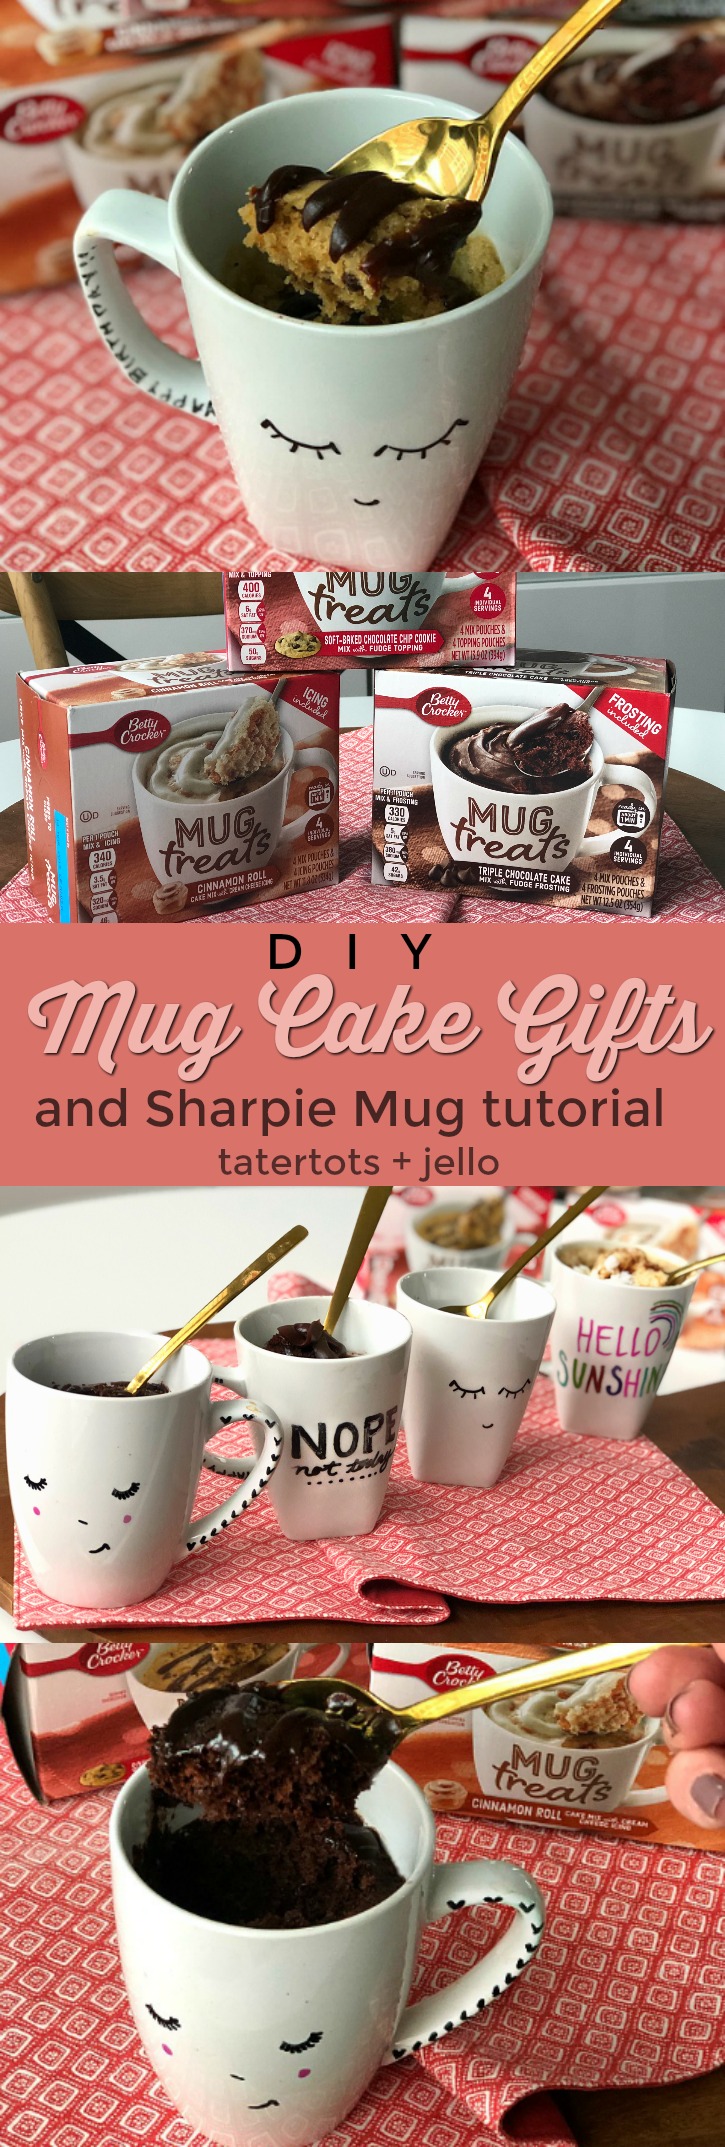 Sharpie mugs are fun to make and a great gift idea! Make a special DIY mug for a friend, neighbor or teacher and fill it with a yummy mug cake mix for a gift ANYONE will love! This tutorial shows you how to make DIY Sharpie Mugs that will last! 